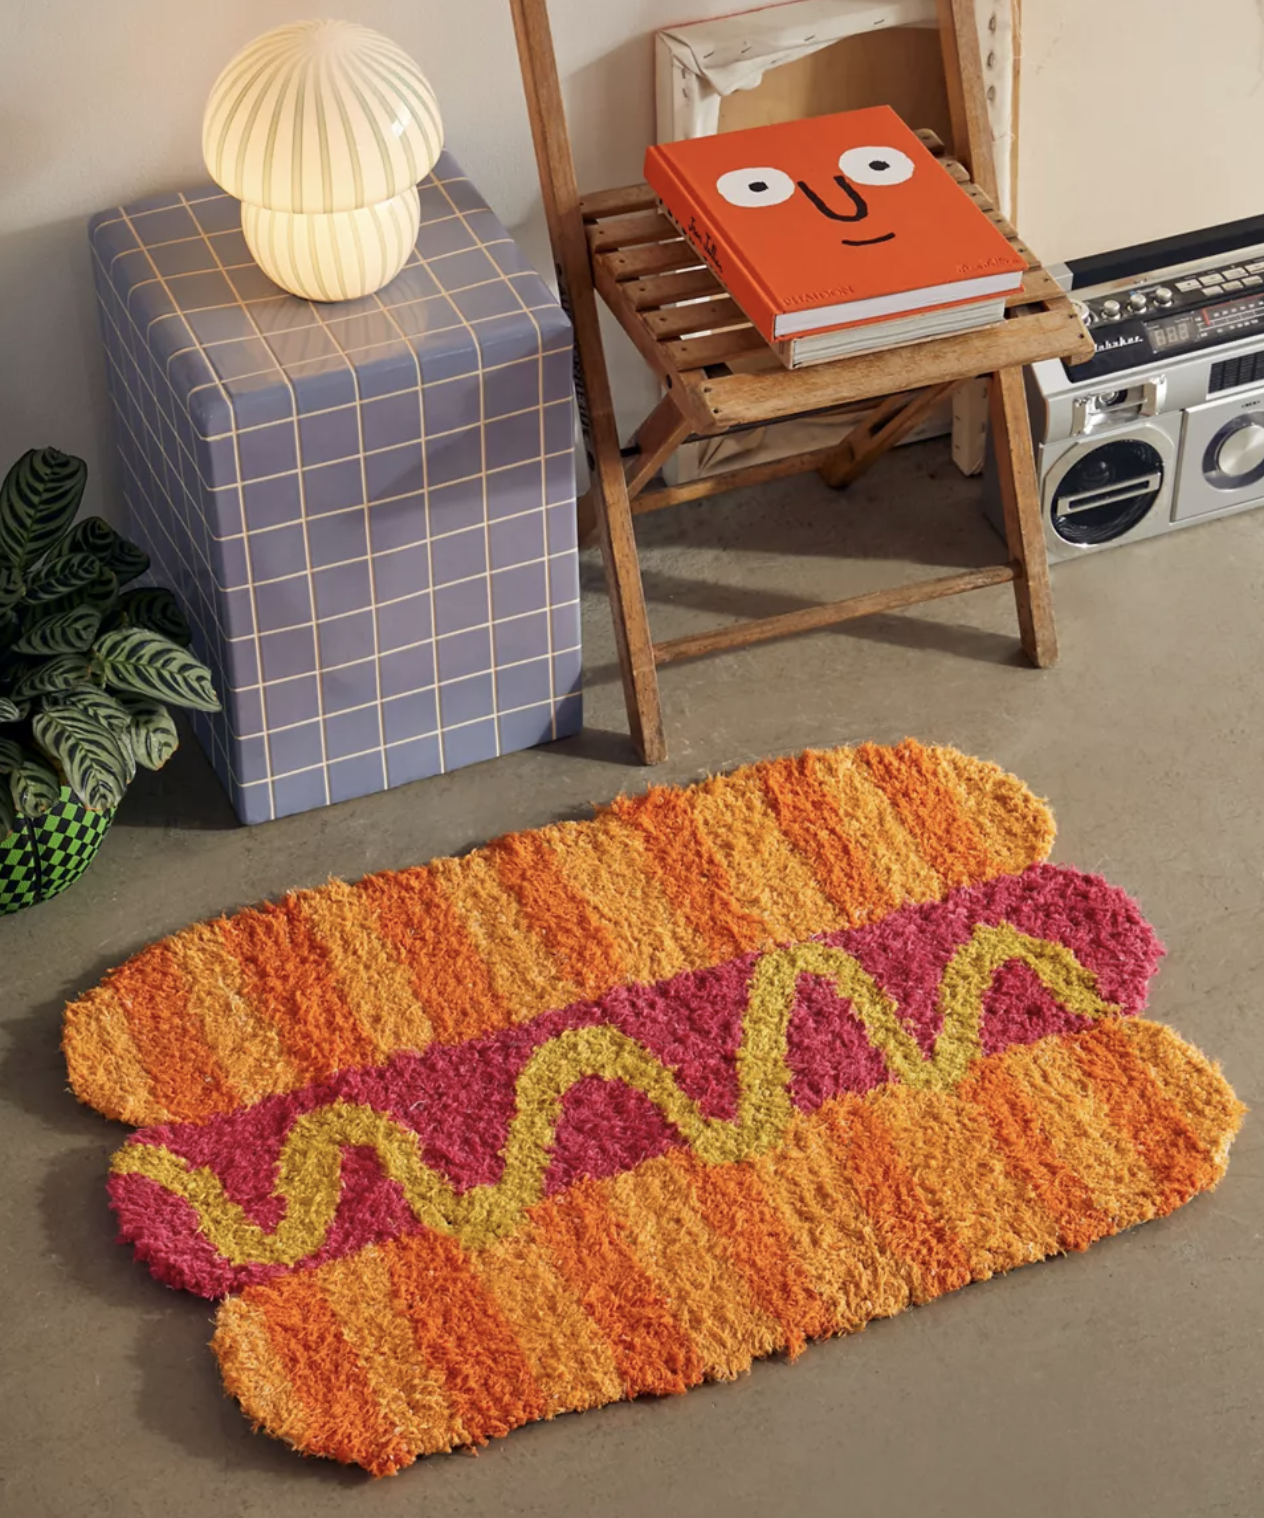 The hot dog rug in front of a chair and table